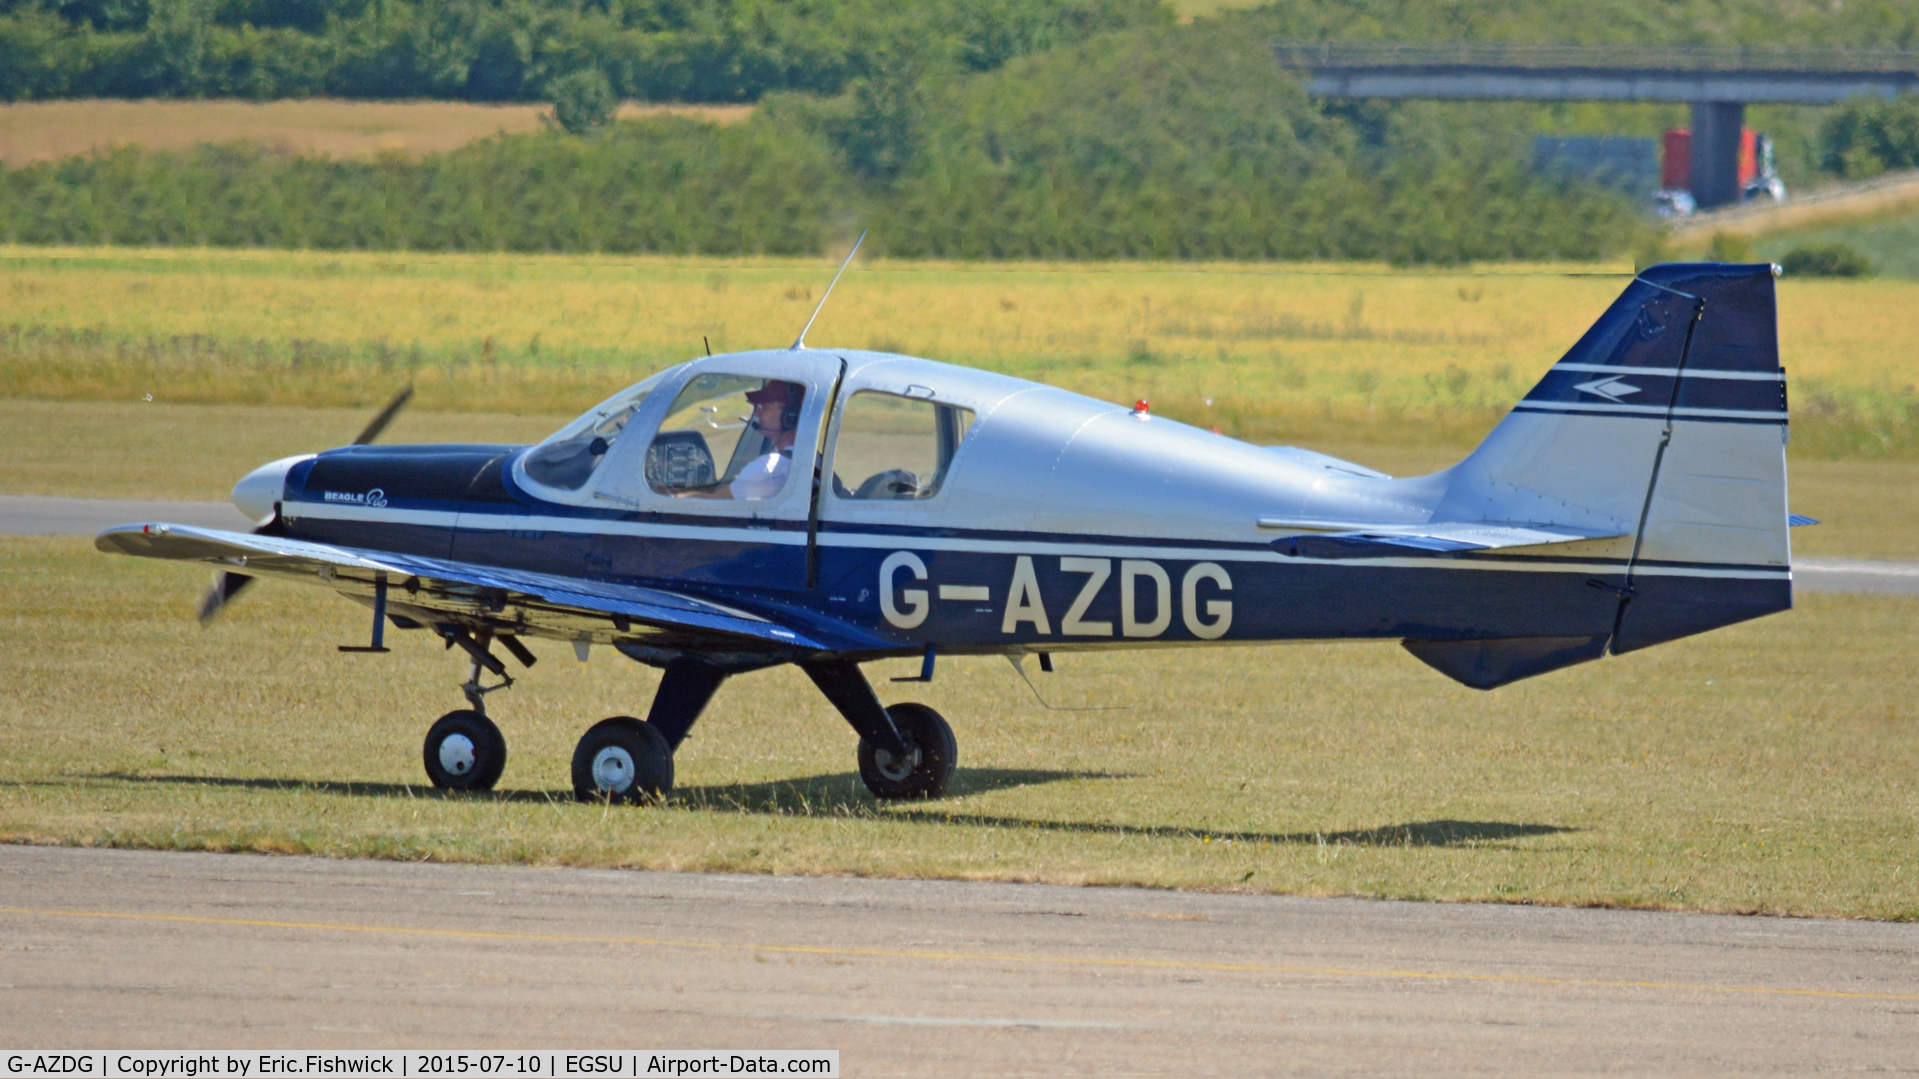 G-AZDG, 1970 Beagle B-121 Pup Series 2 (Pup 150) C/N B121-145, 1. G-AZDG at Duxford Airfield.